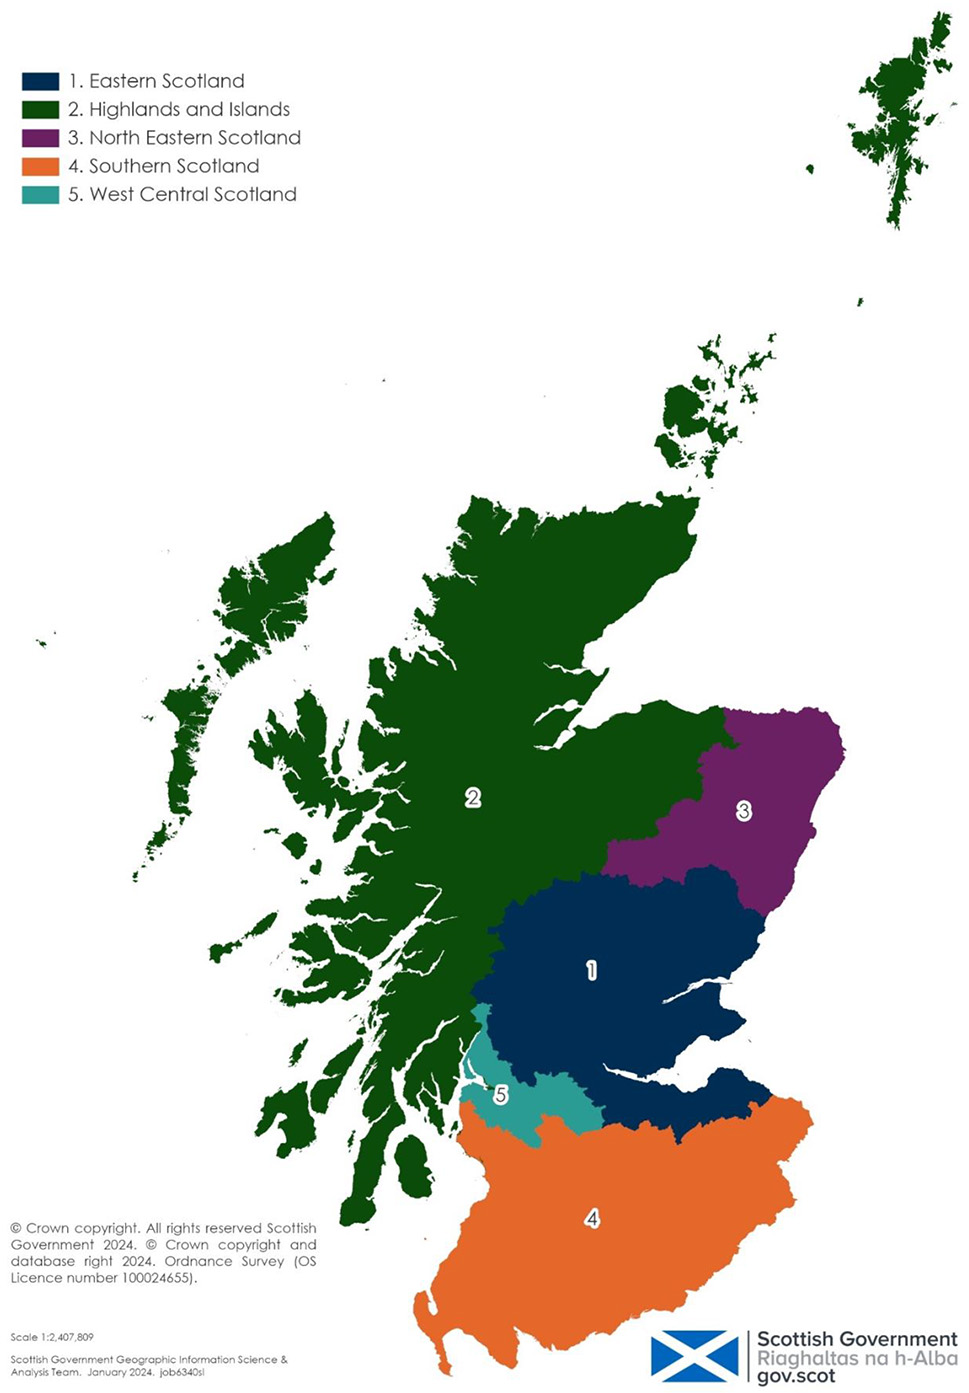 A map of Scotland showing the 5 existing ITL2 regions within Scotland.